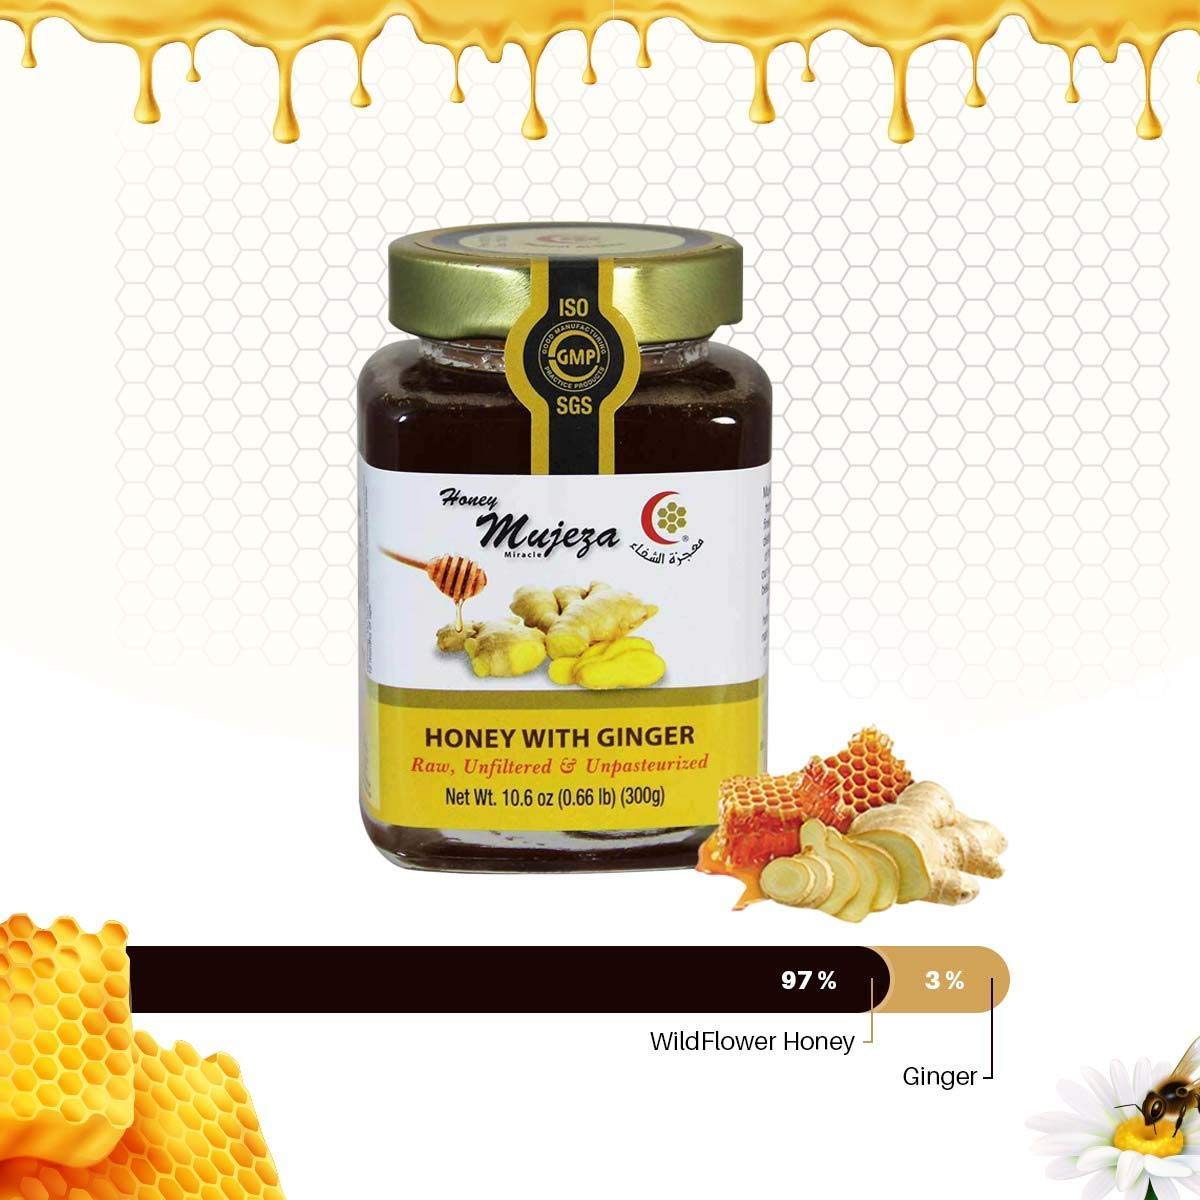 Pack of 6 Black Seed Honey with Fresh Ginger Juice, Unheated Unfiltered Unprocessed 100% Natural Raw Liquid Honey (500g / 17.6oz) - Mujezat Al-Shifa